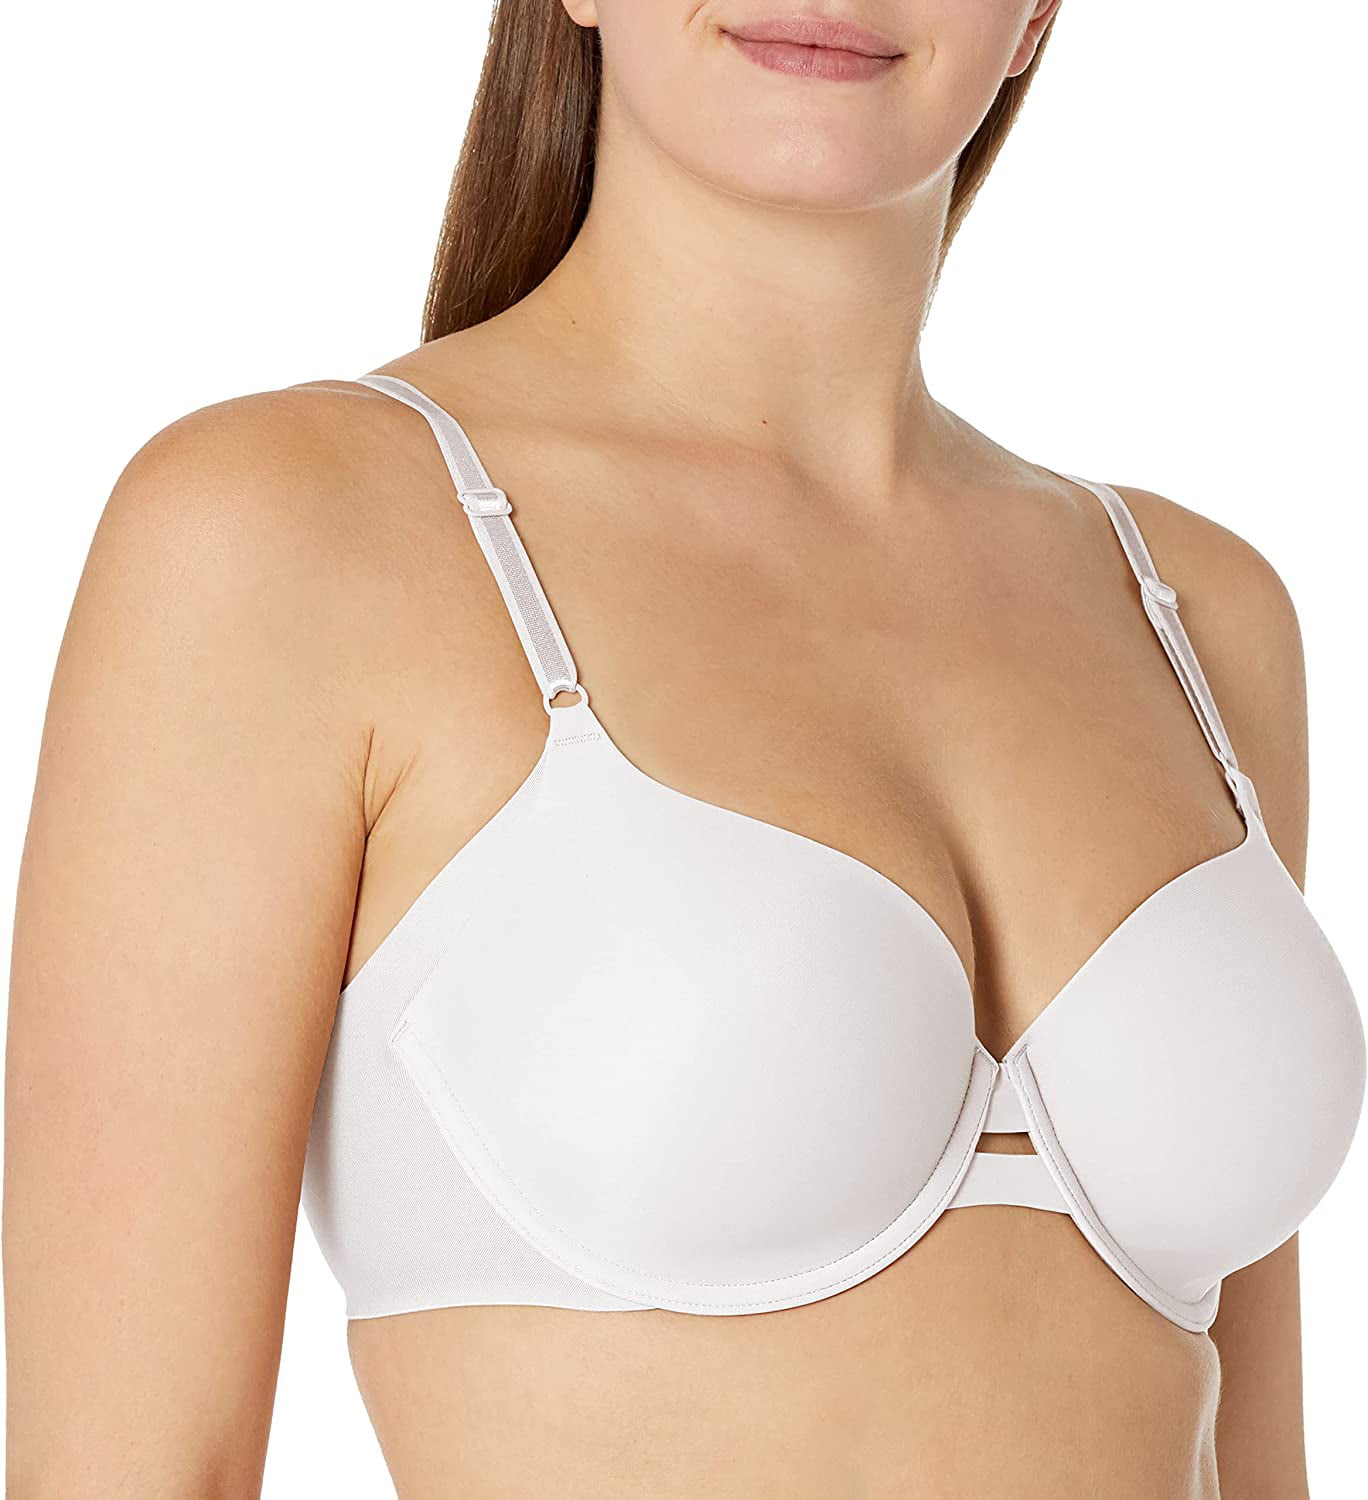 Women's Warner's RN0141A Invisible Bliss Cotton Wirefree Bra with